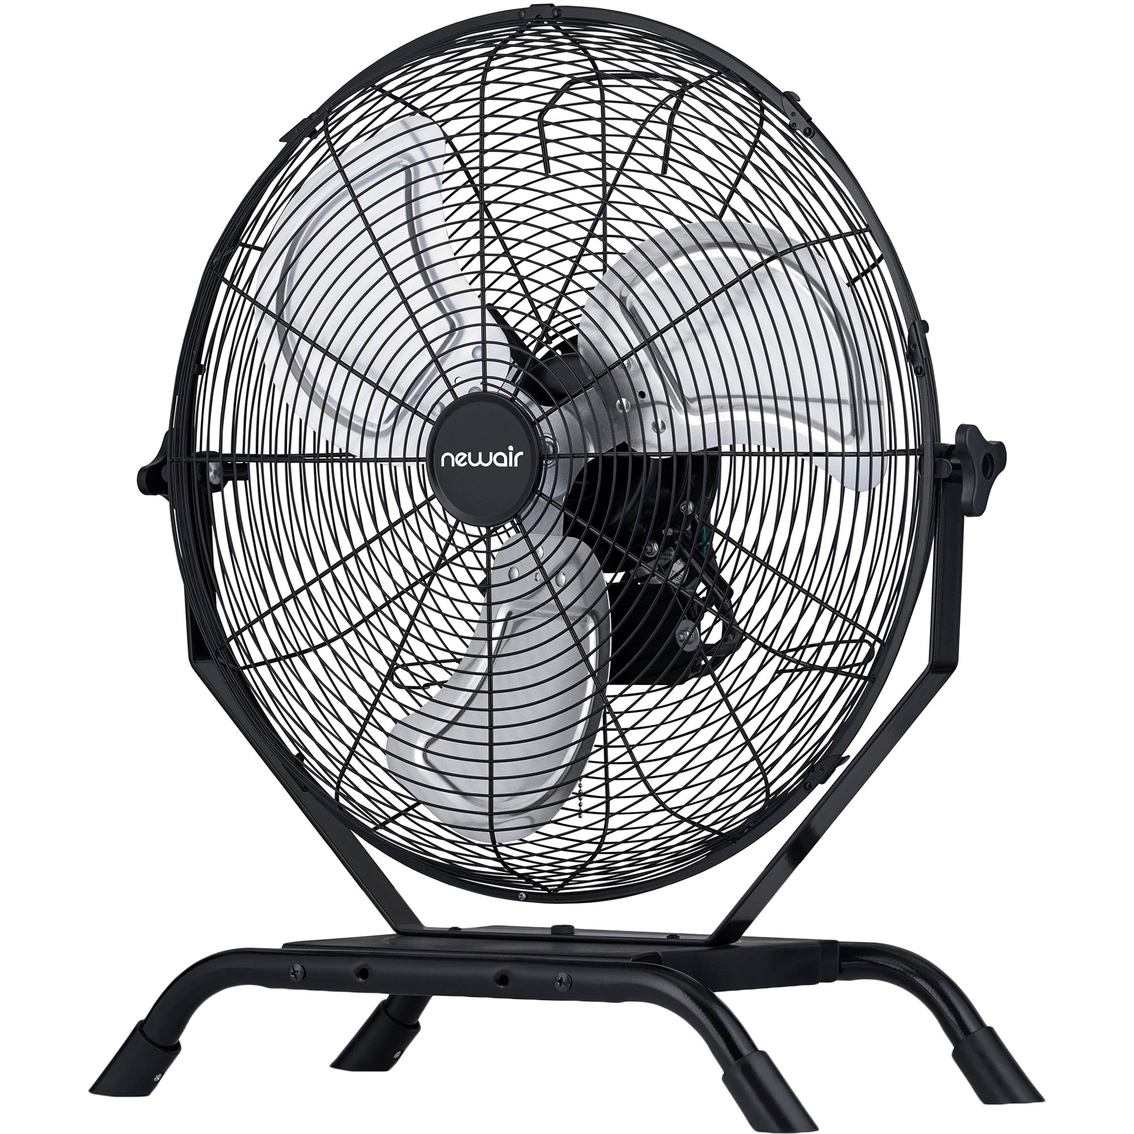 NewAir 18 in. Outdoor Rated 2-in-1 High Velocity Floor or Wall Mounted Fan - Image 6 of 10